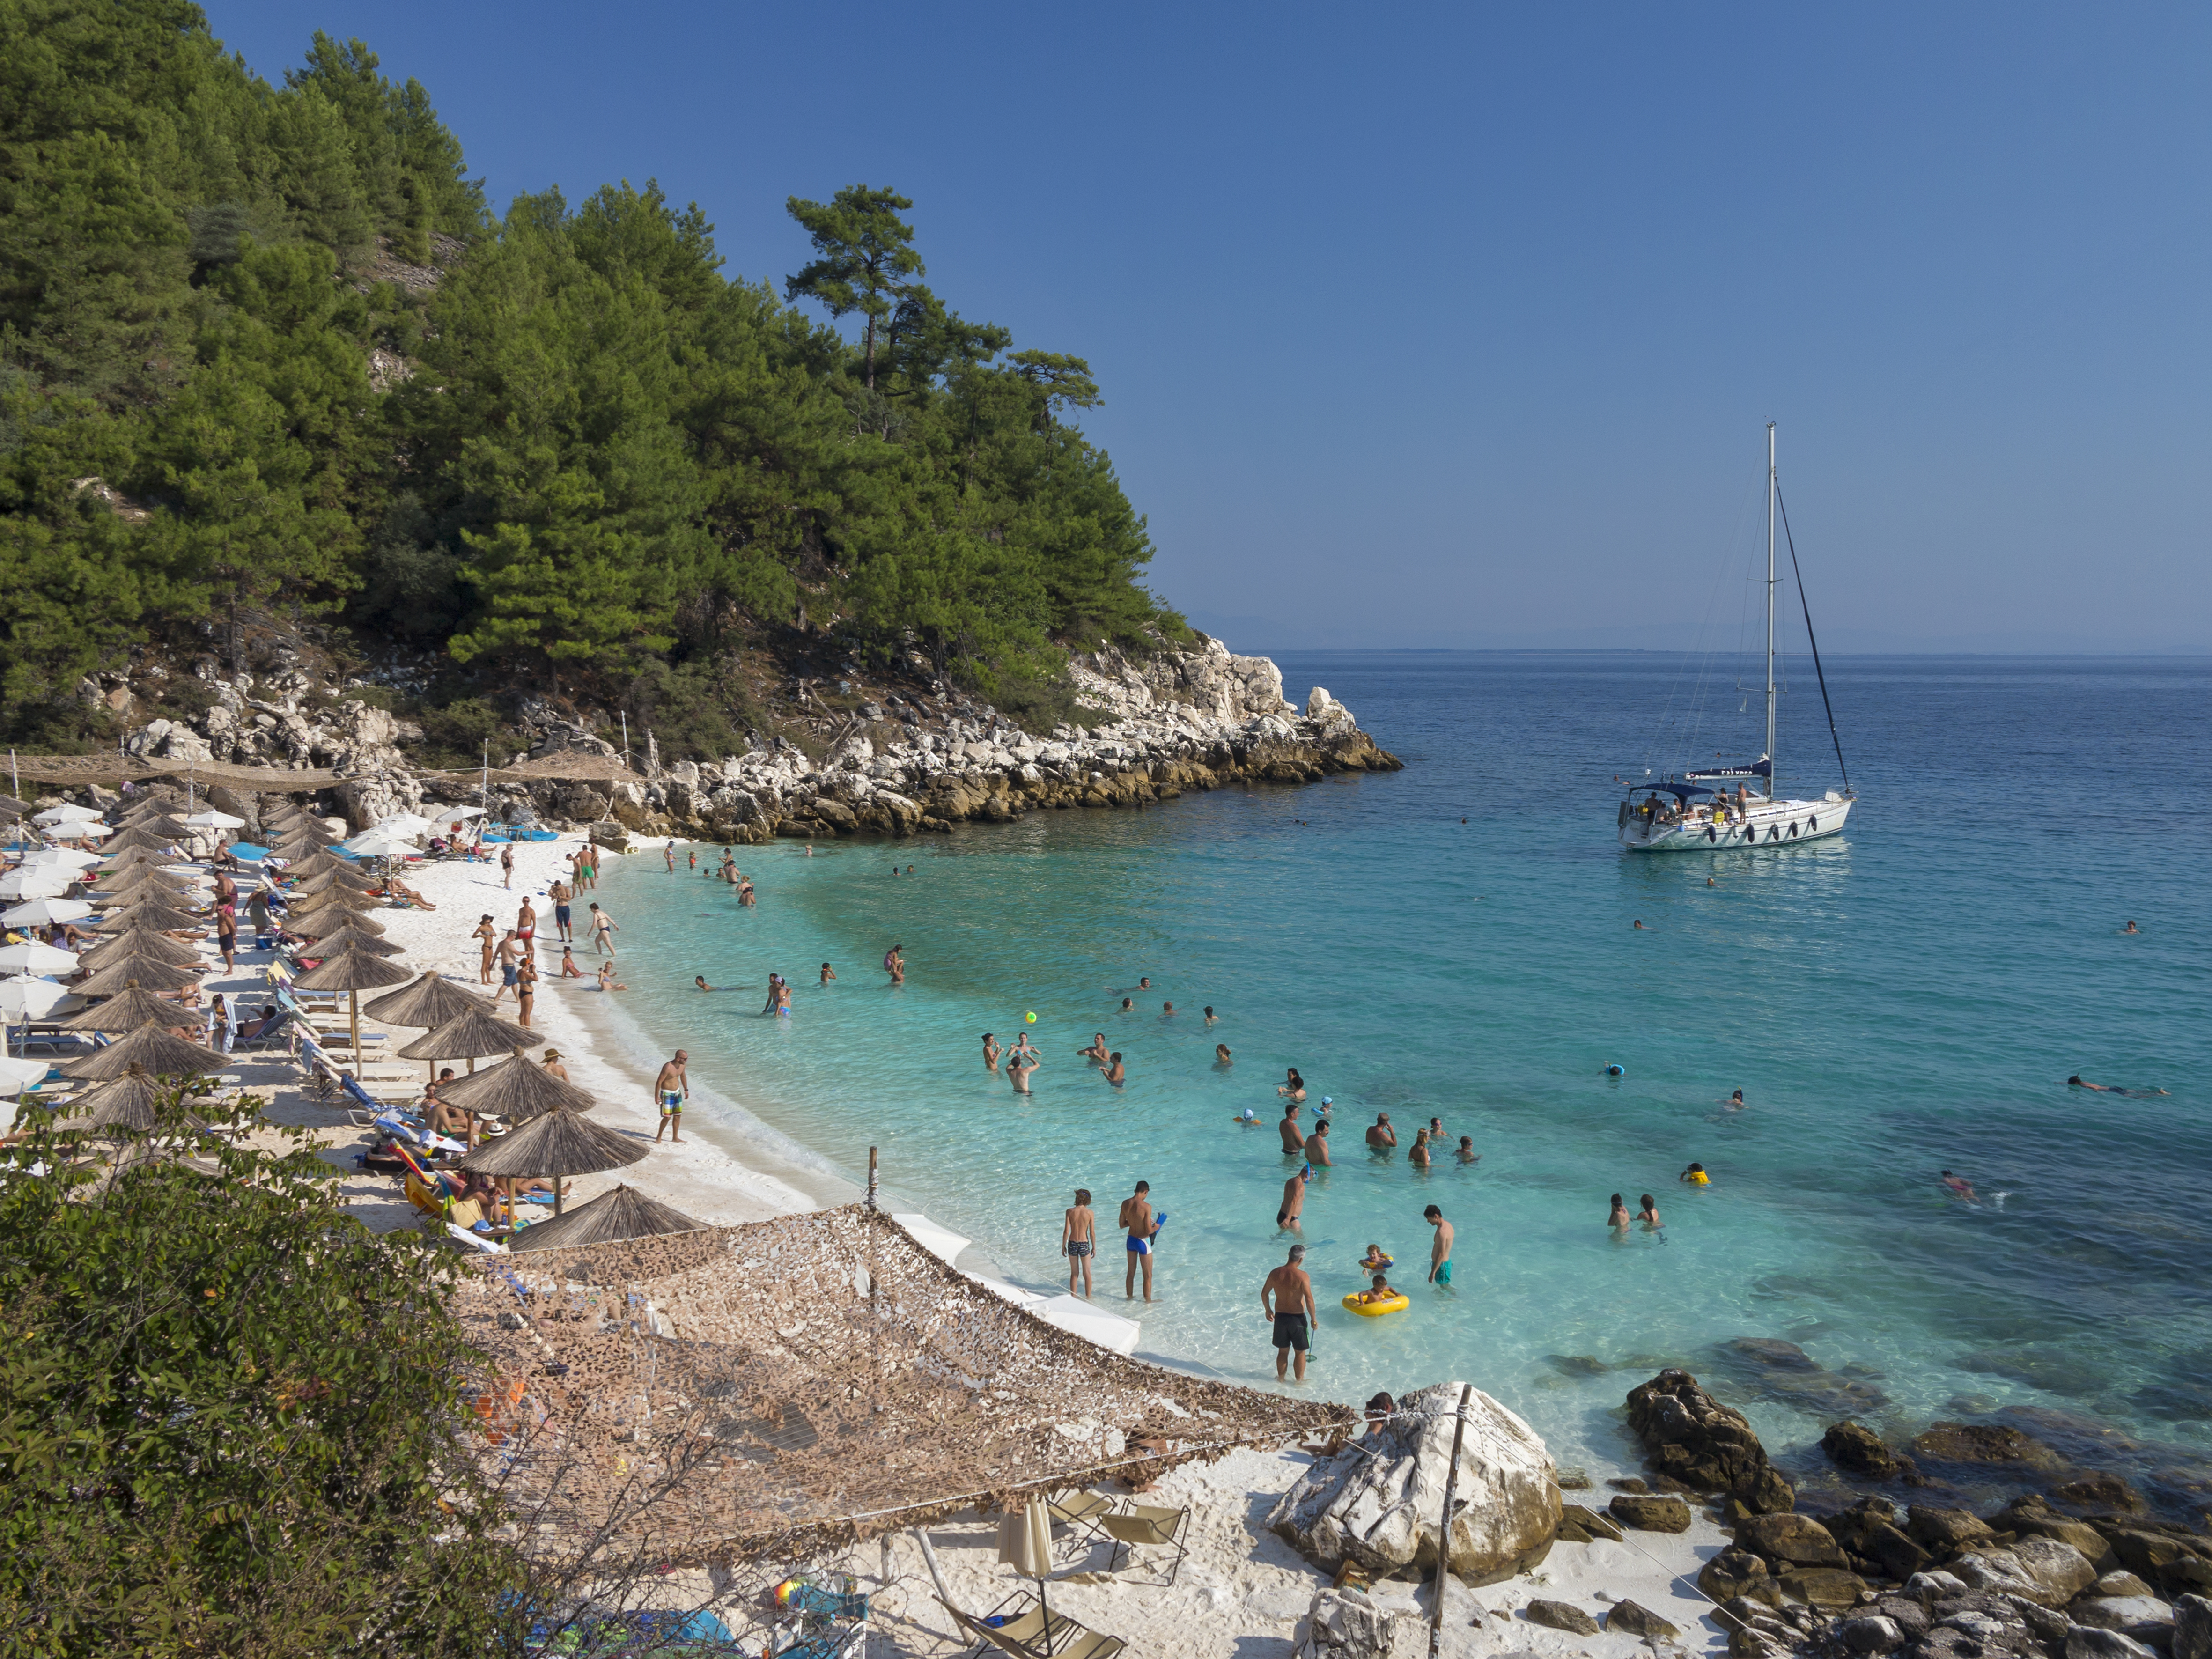 Thassos (pictured) took a close second, with package holidays costing £862 per person in the research